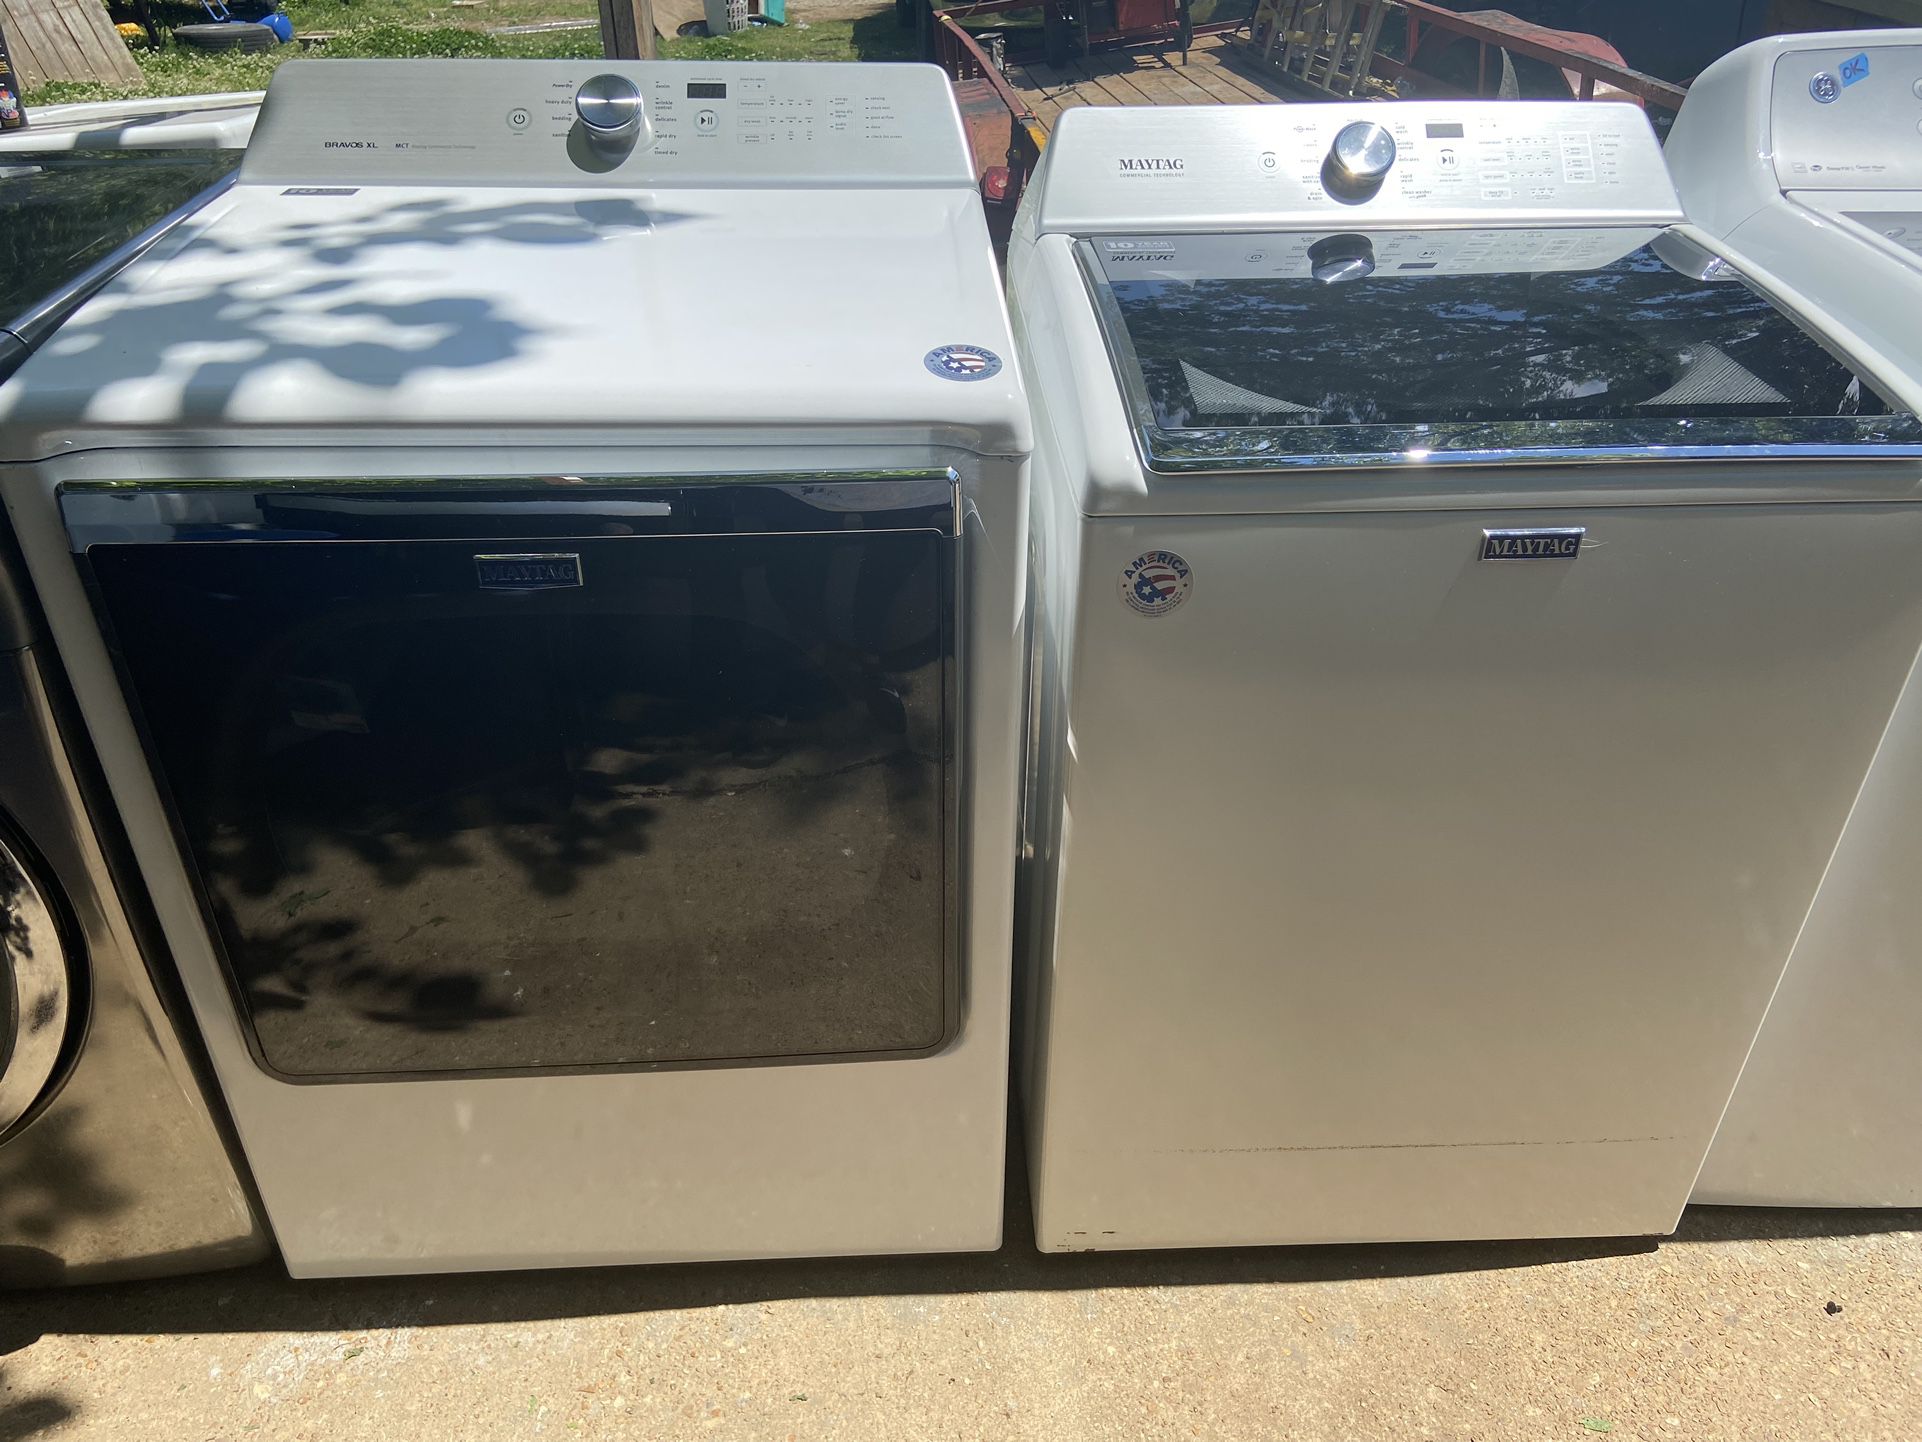 MAYTAG SET WASHER AND DRYER 